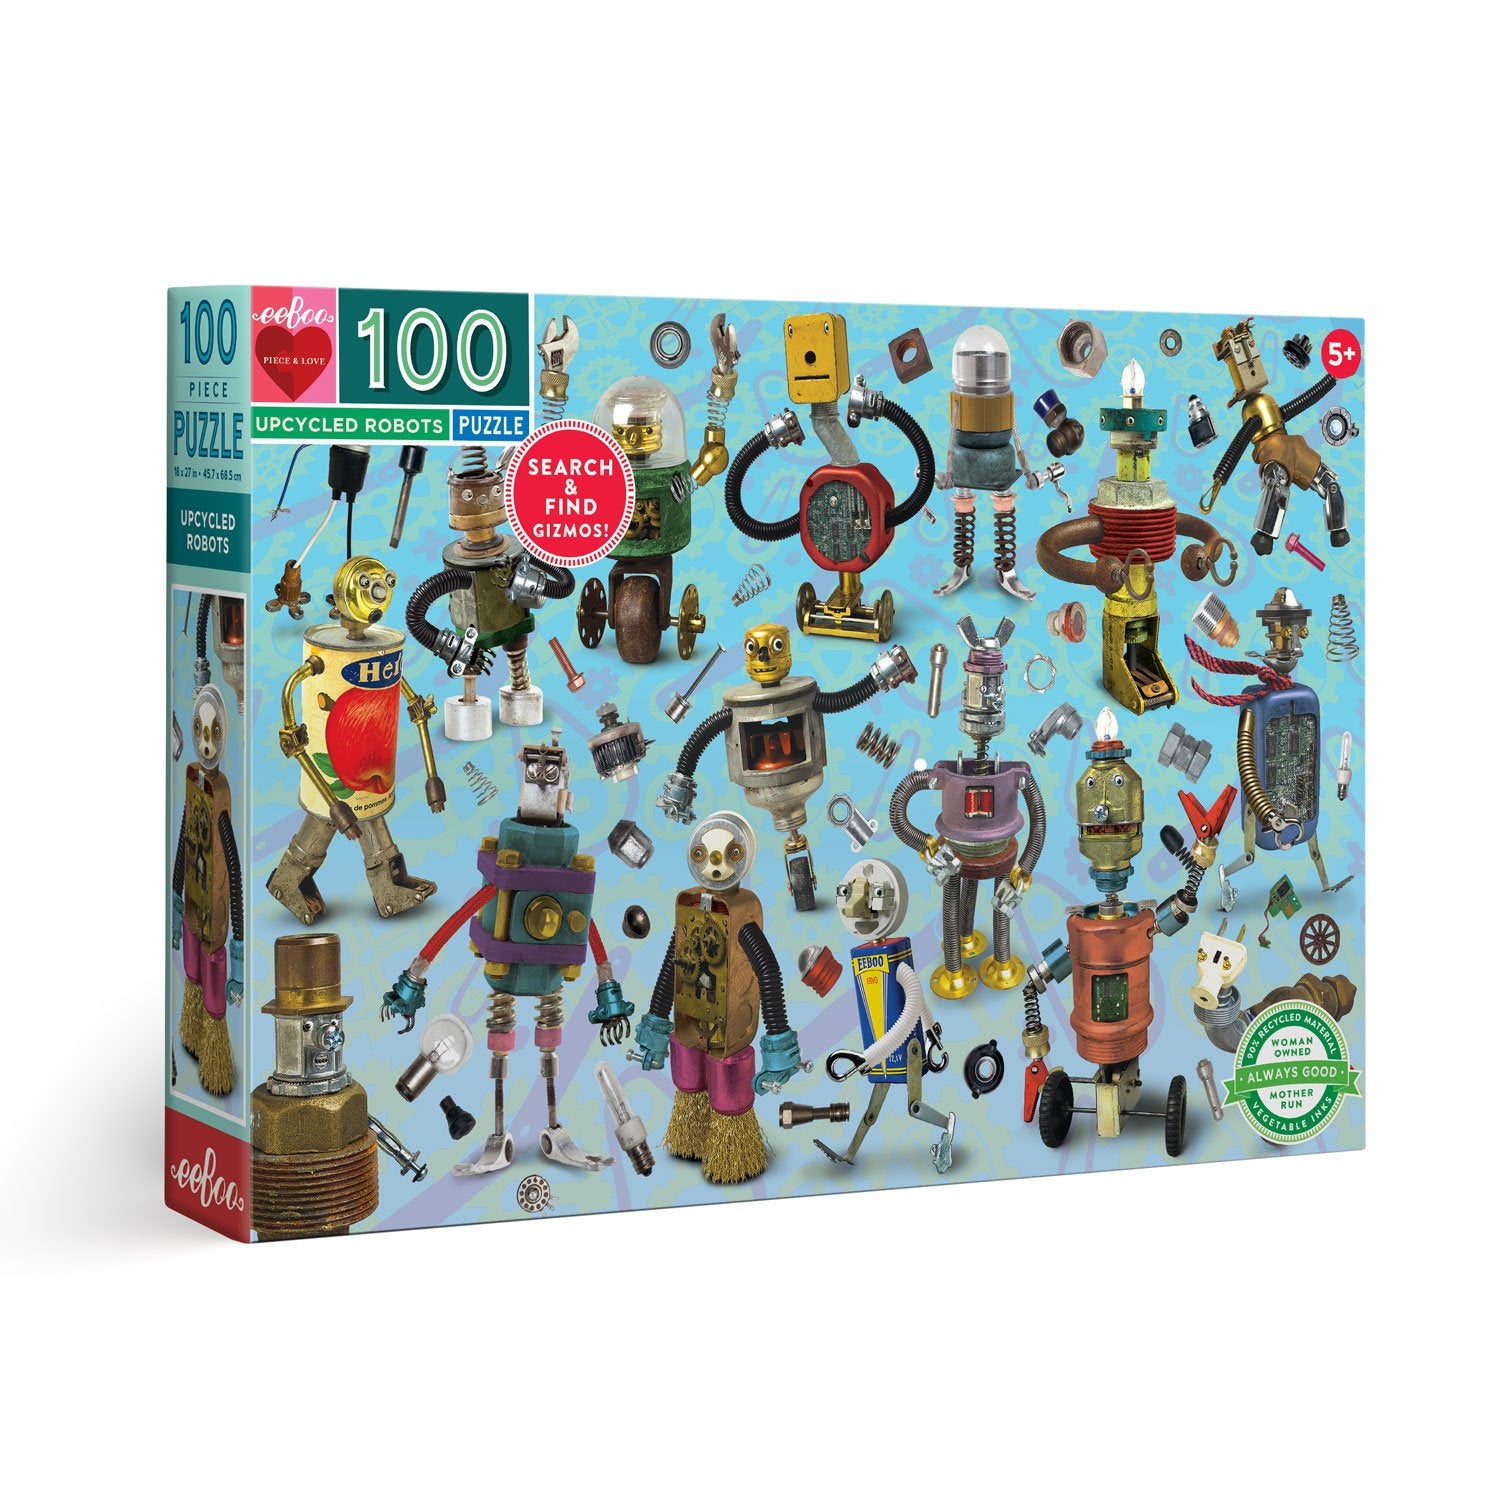 Upcycled Robots - 100 Piece Puzzle    